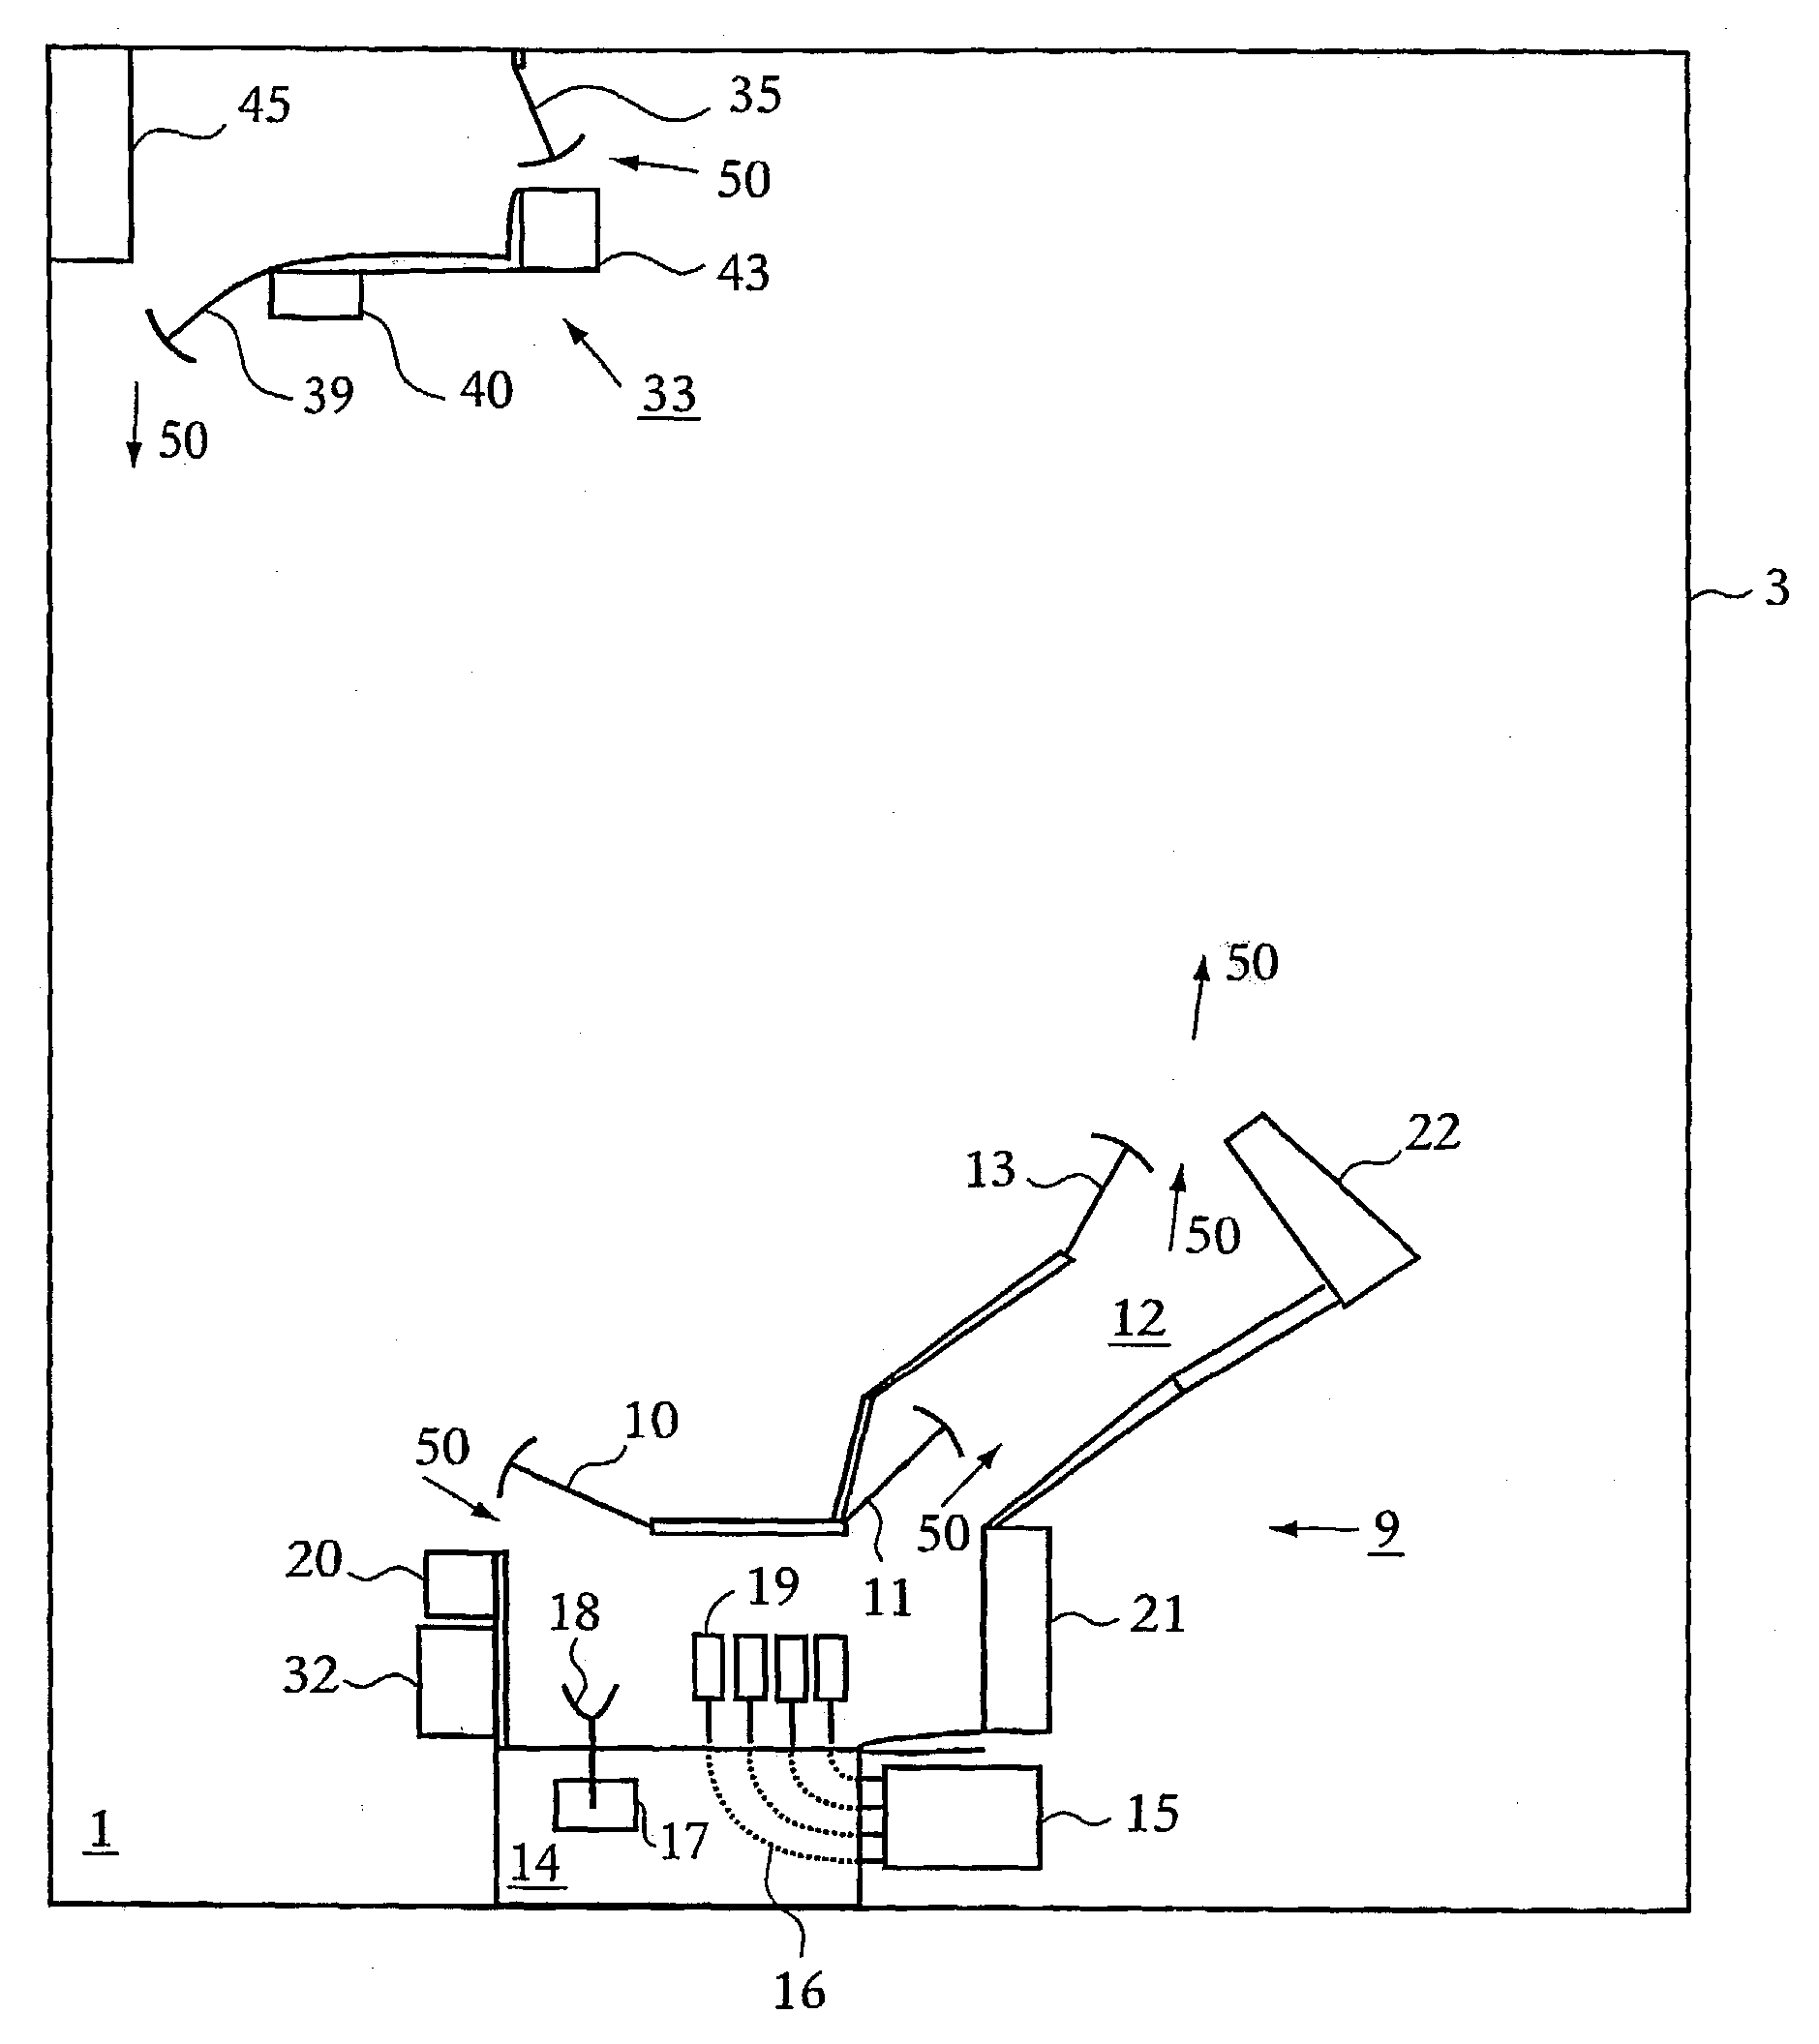 Method of milking and milking parlor